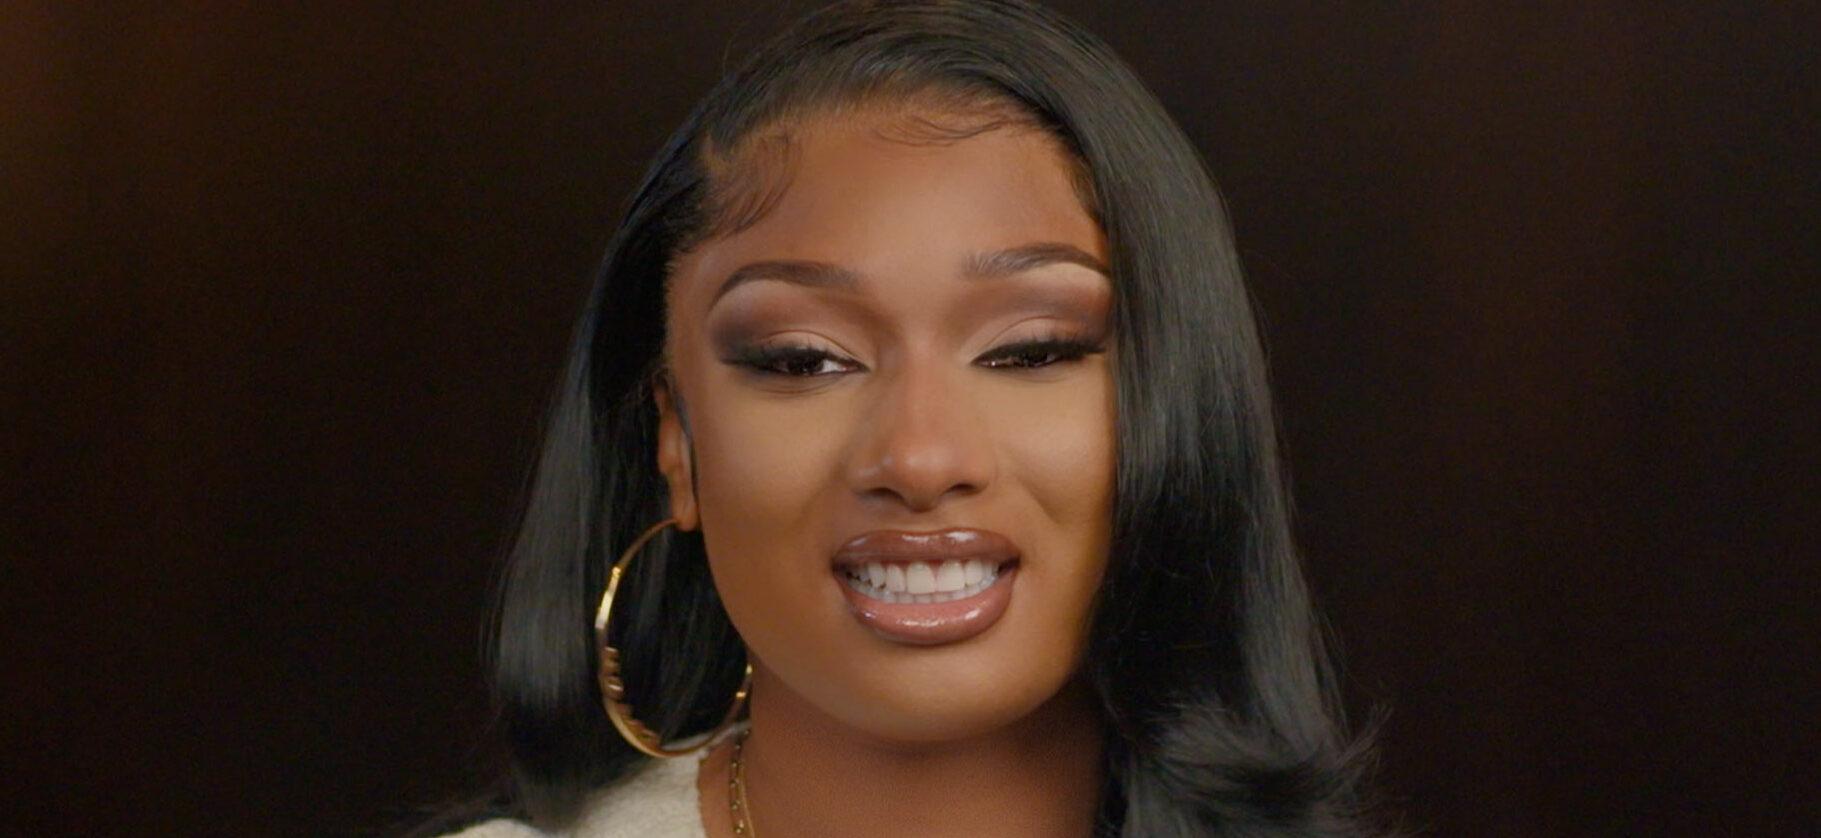 Megan Thee Stallion ‘Not Feeling Well’ After Being Exposed To COVID